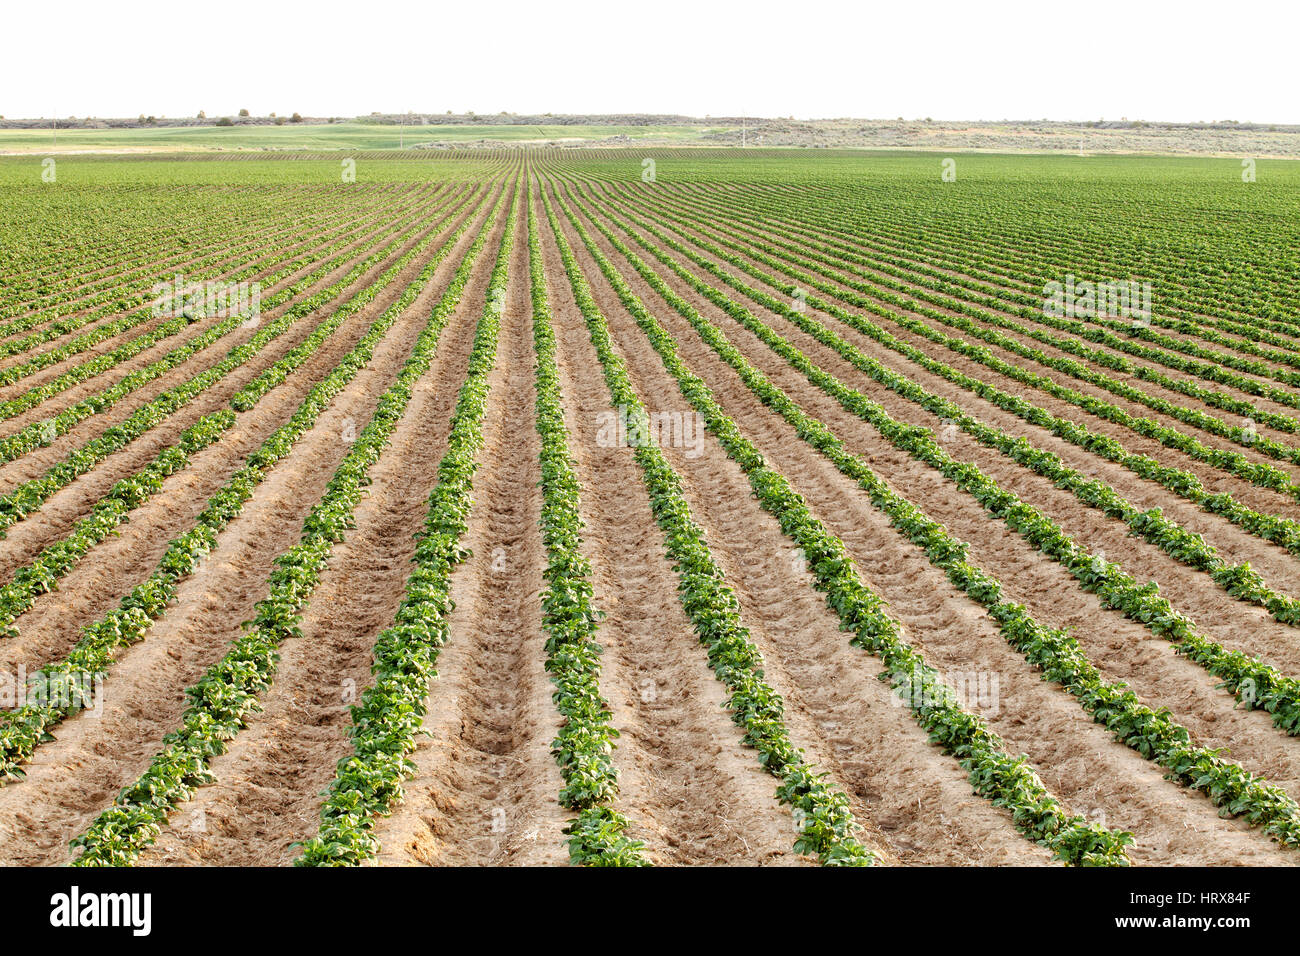 Recently germinated rows of Idaho potatoes growing in a farm field. Stock Photo